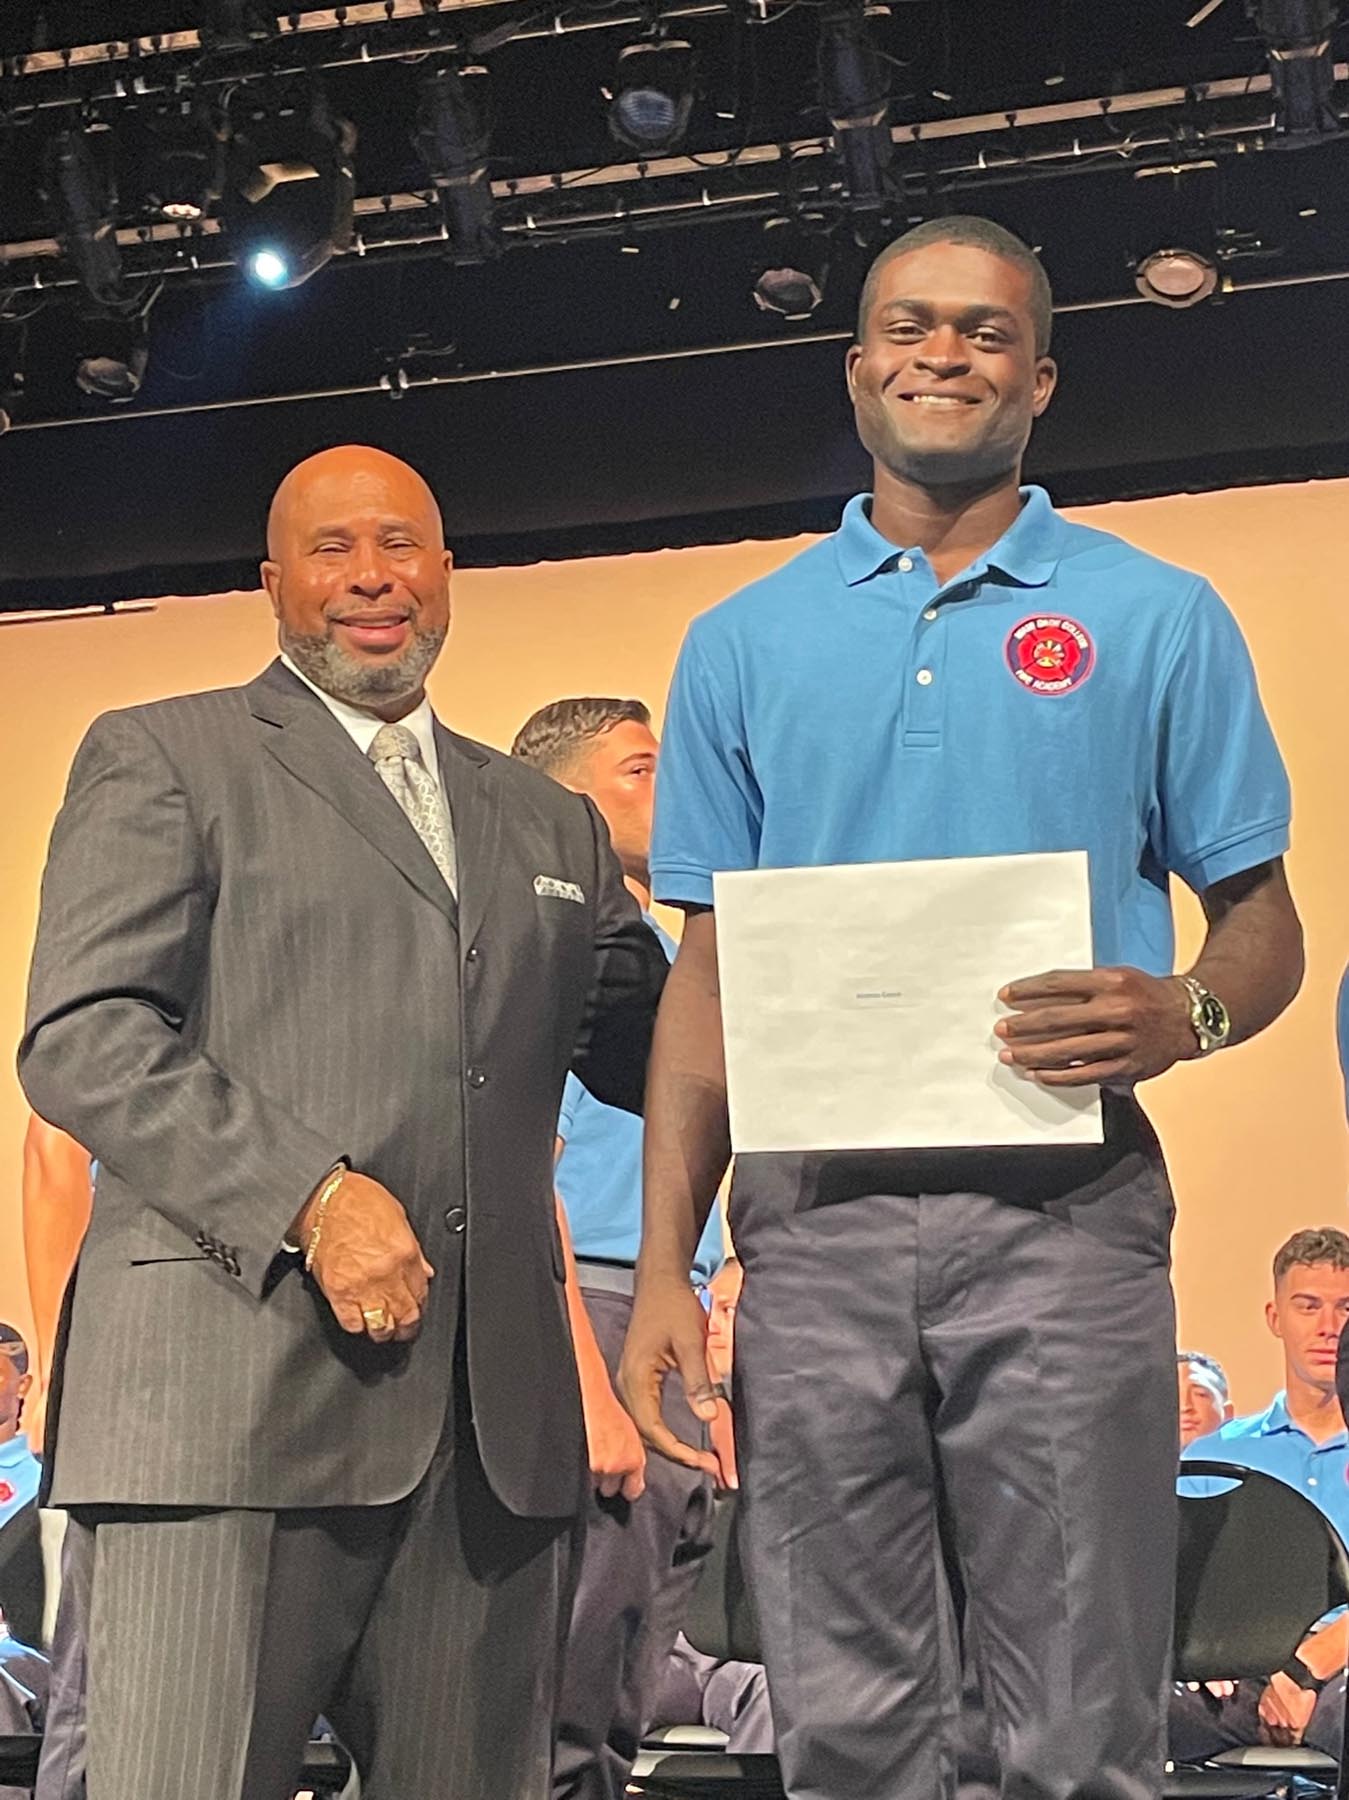 Jacaree Eason receives his diploma after successfully completing Miami-Dade College’s Fire Academy.